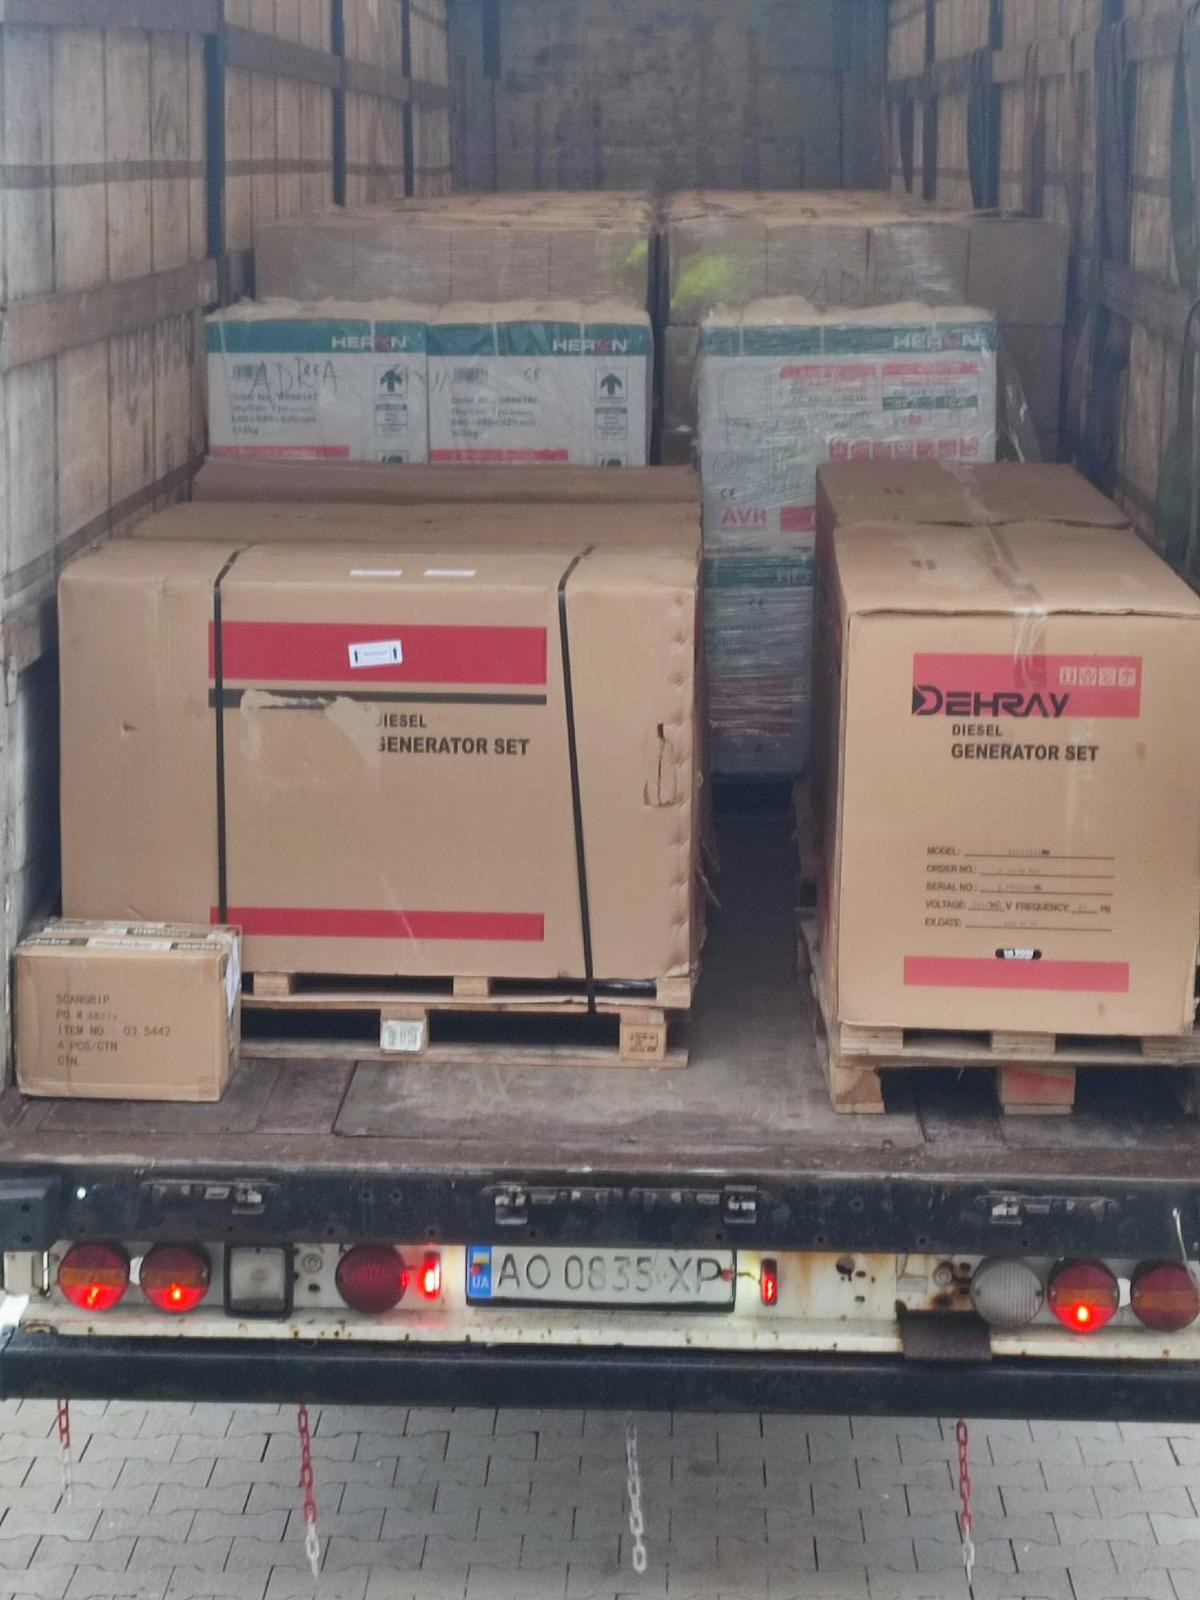 ADRA Slovakia launched a collection of electricity generators for Ukrainian hospitals in war-torn cities. The first twelve generators left Slovakia, heading to the city of Irpin.